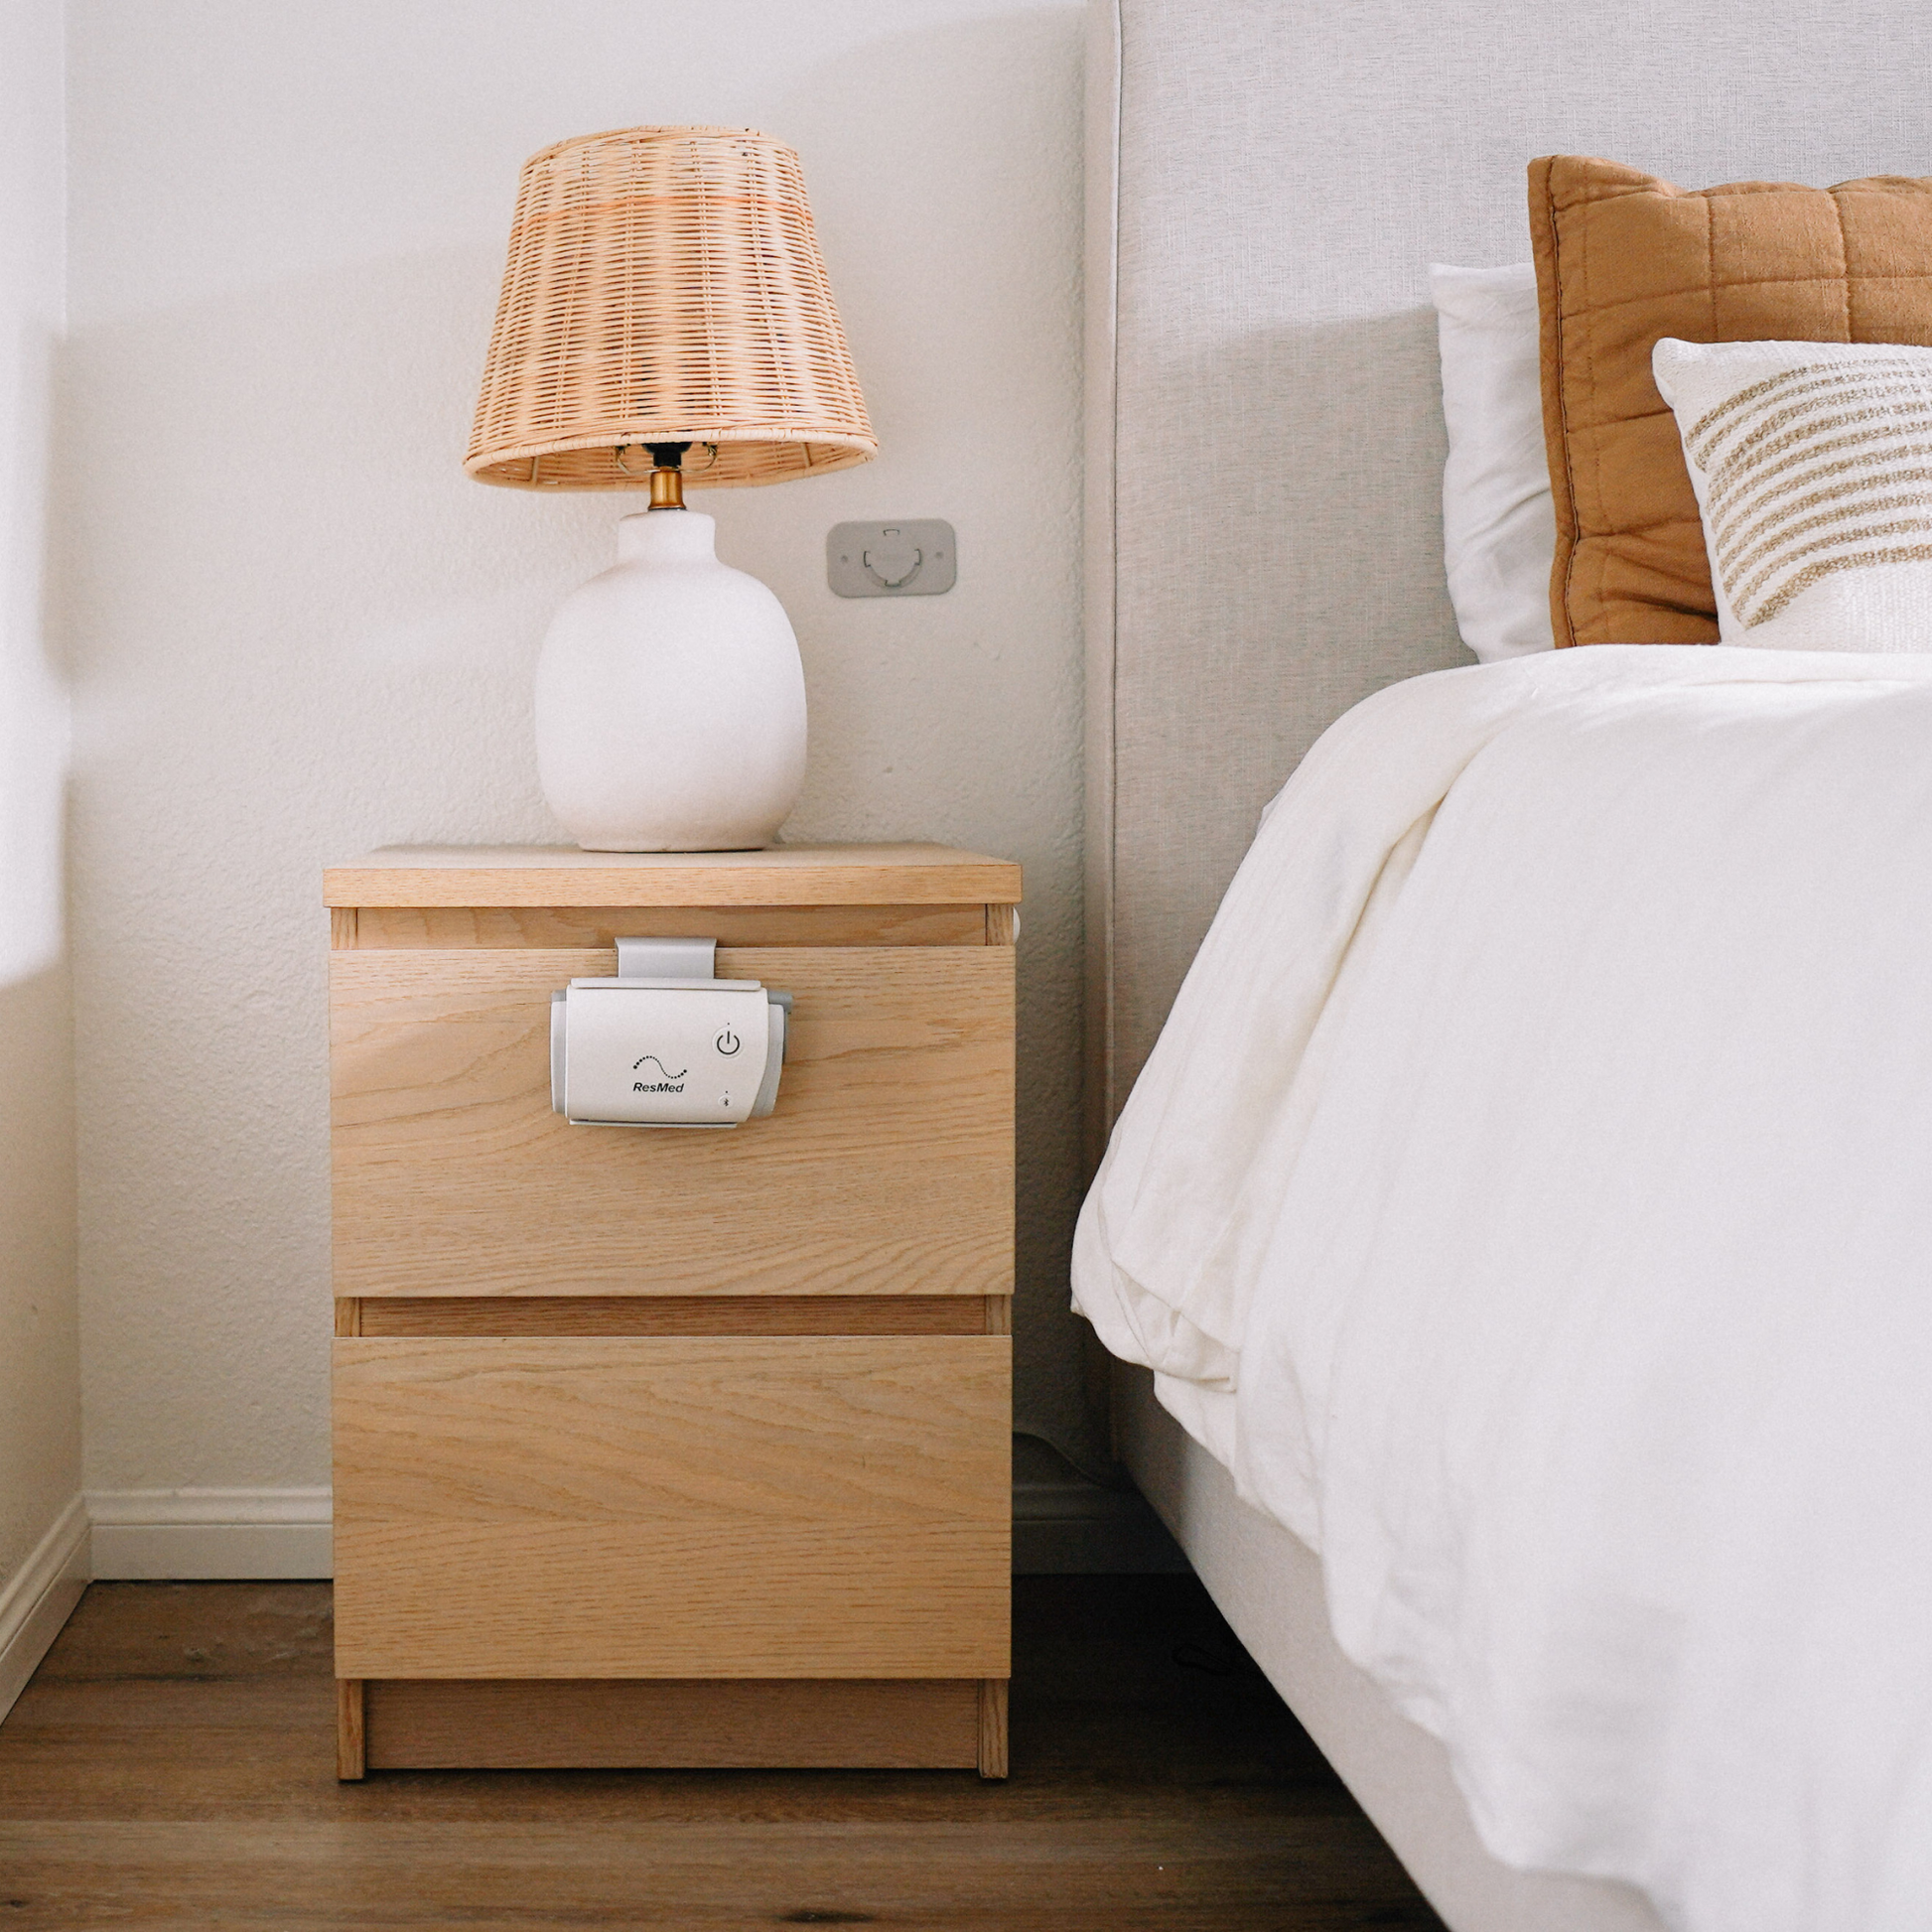 A bedside table in view with a bedlamp on top of it and the ResMed AirMini Travel CPAP Machine hooked onto a drawer